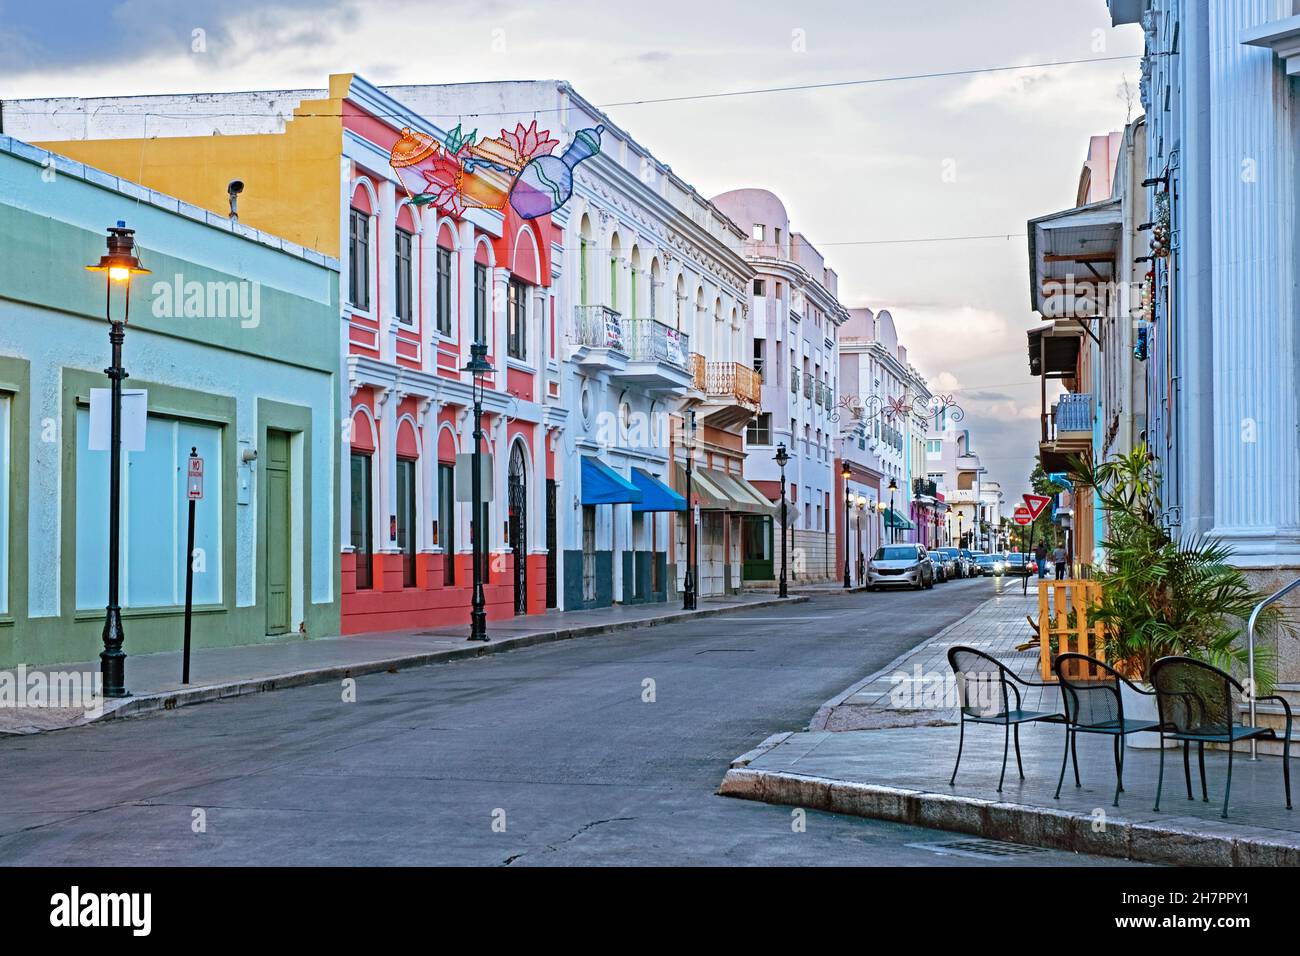 Pastel coloured buildings in Spanish colonial style in Historic Zone of puerto rico time zone vs new york